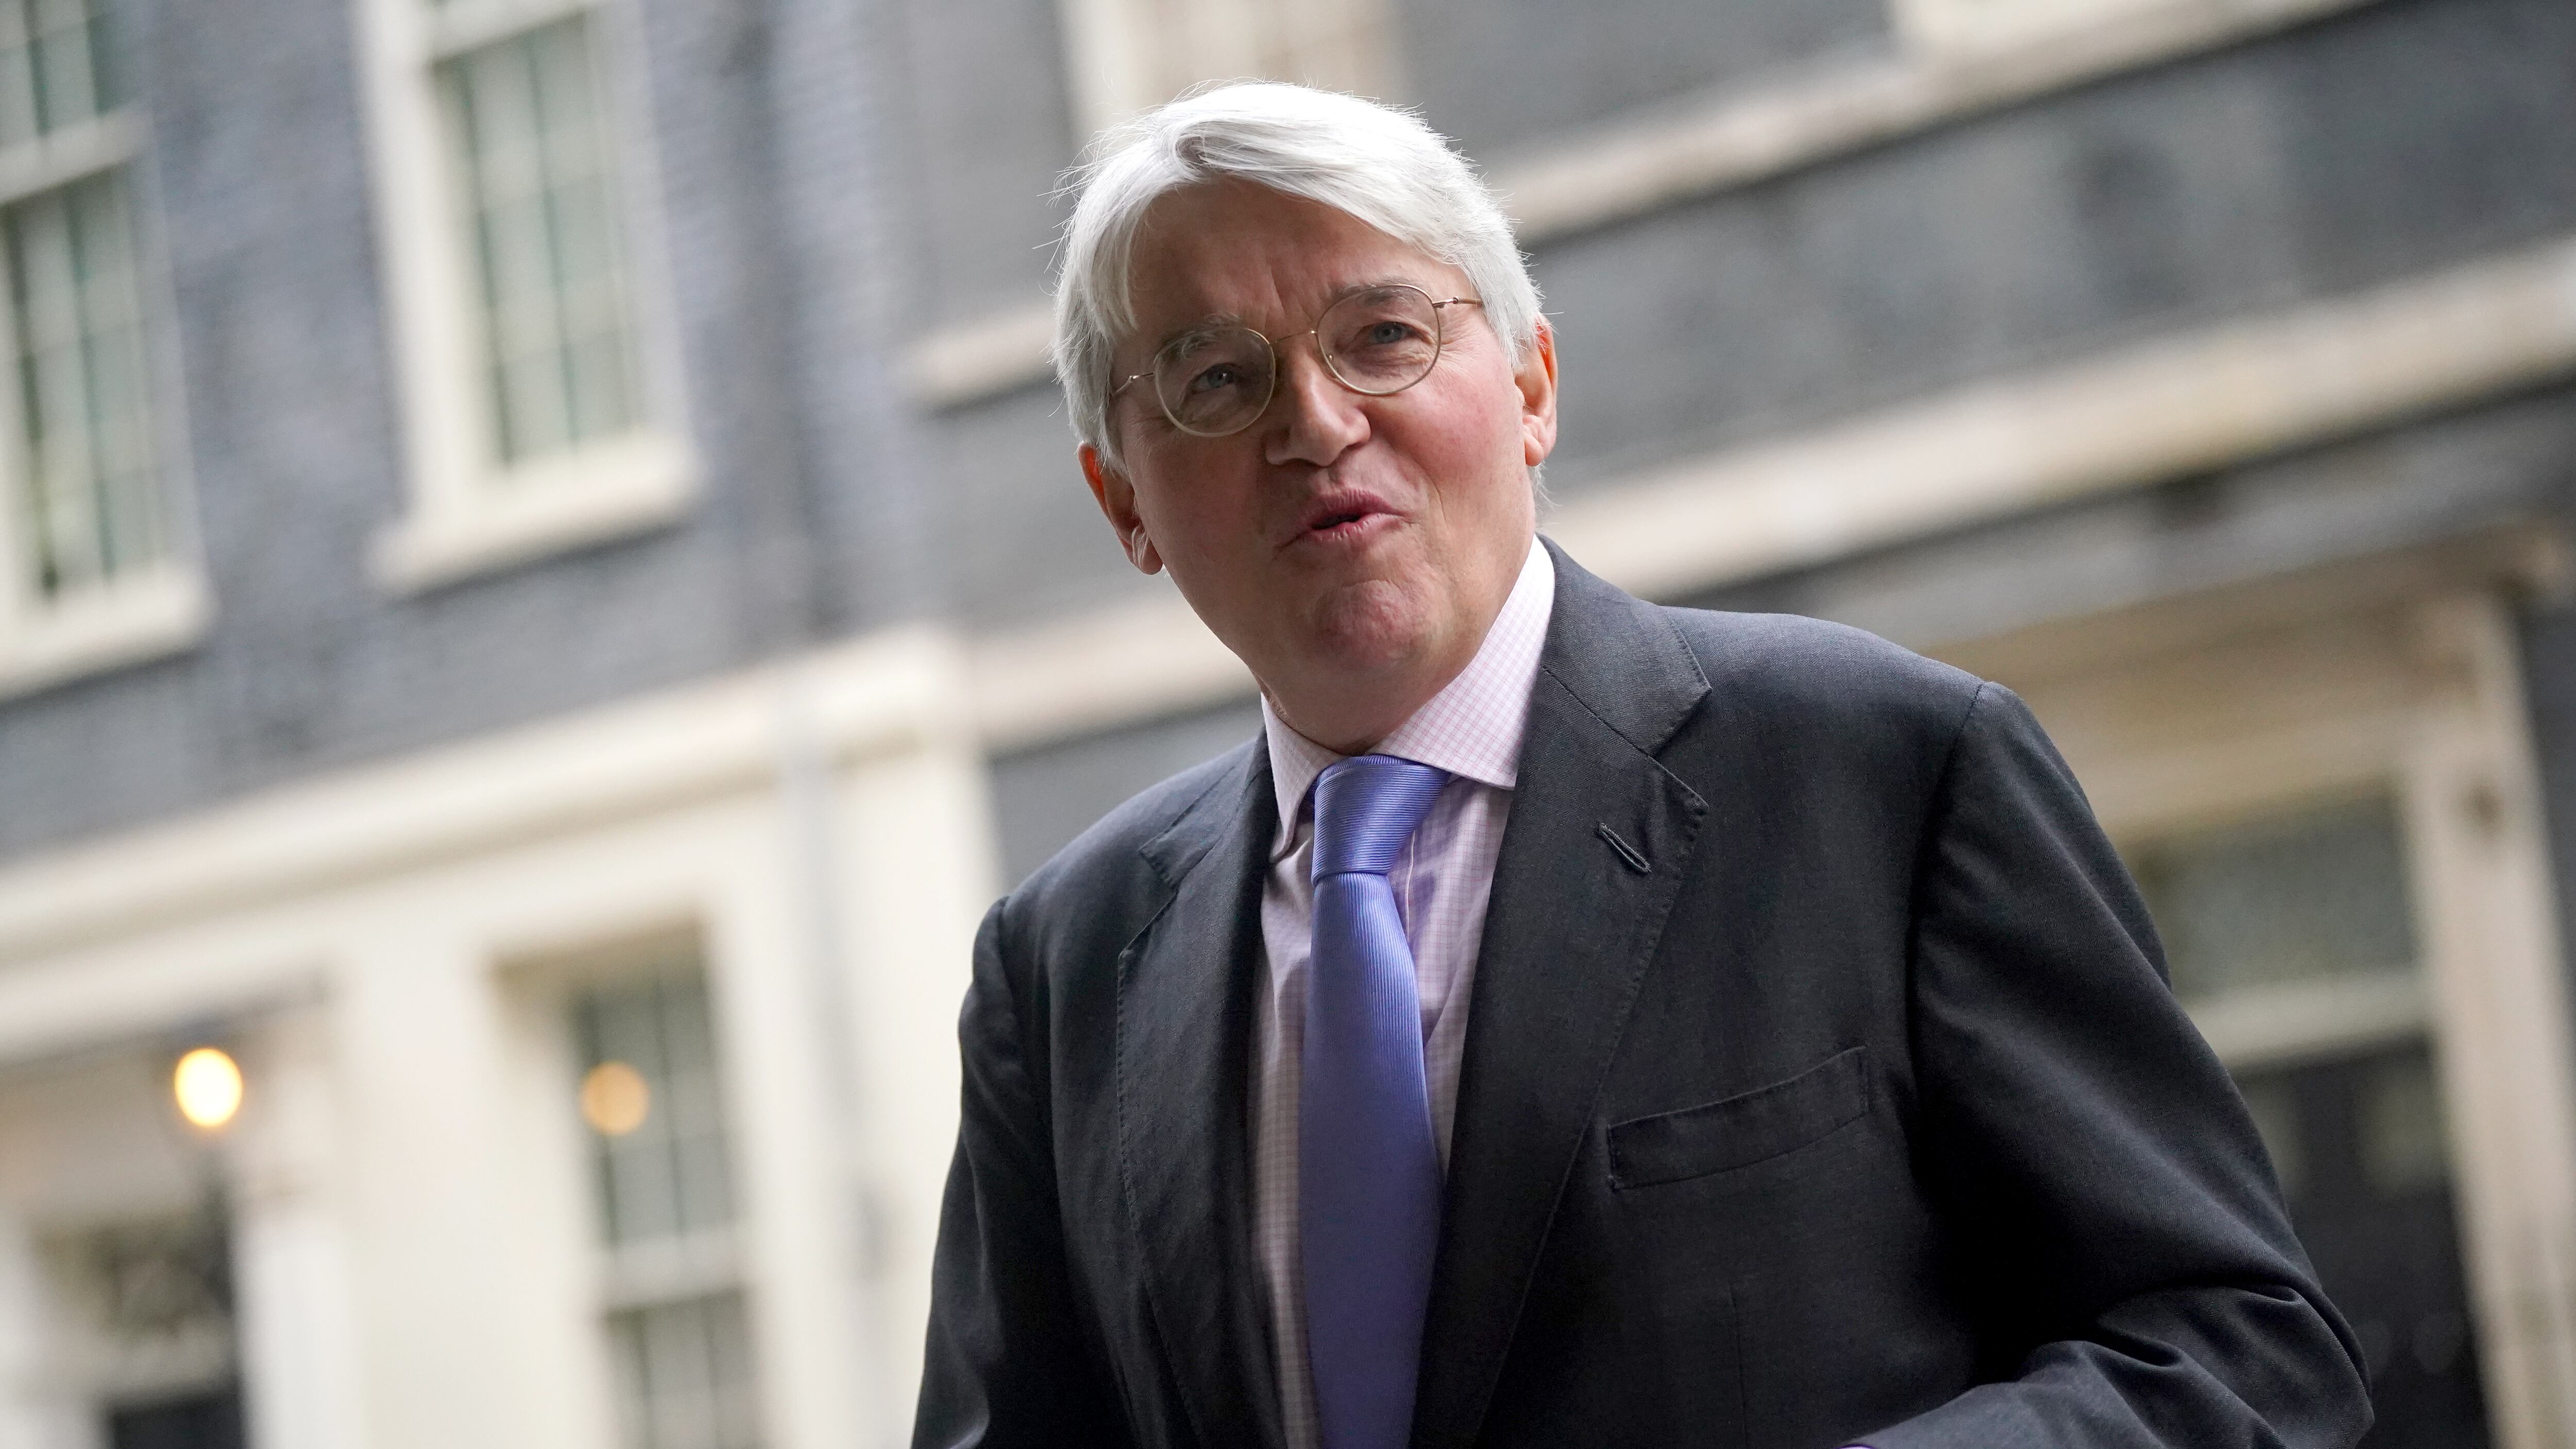 Foreign Office minister Andrew Mitchell attempted to downplay concerns and detailed how the UN Security Council (UNSC) resolution sets out the demand for the ‘unconditional release of all hostages’